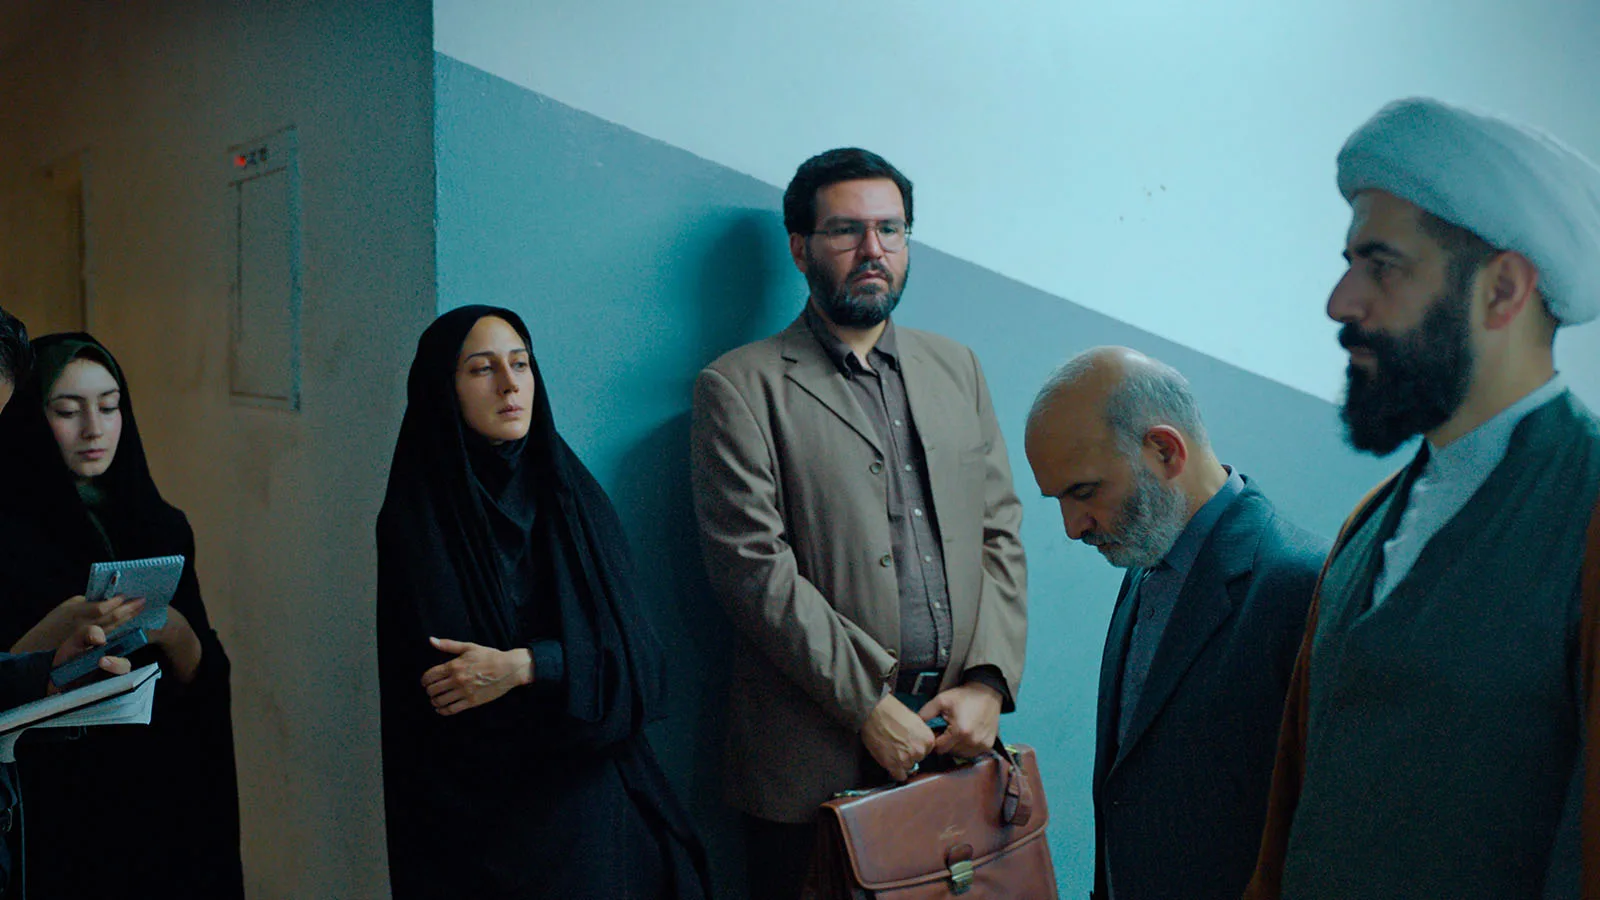 A still from Holy Spider. A group of people, including actress Zar Amir Ebrahimi, who plays the investigative journalist gather in a hallway